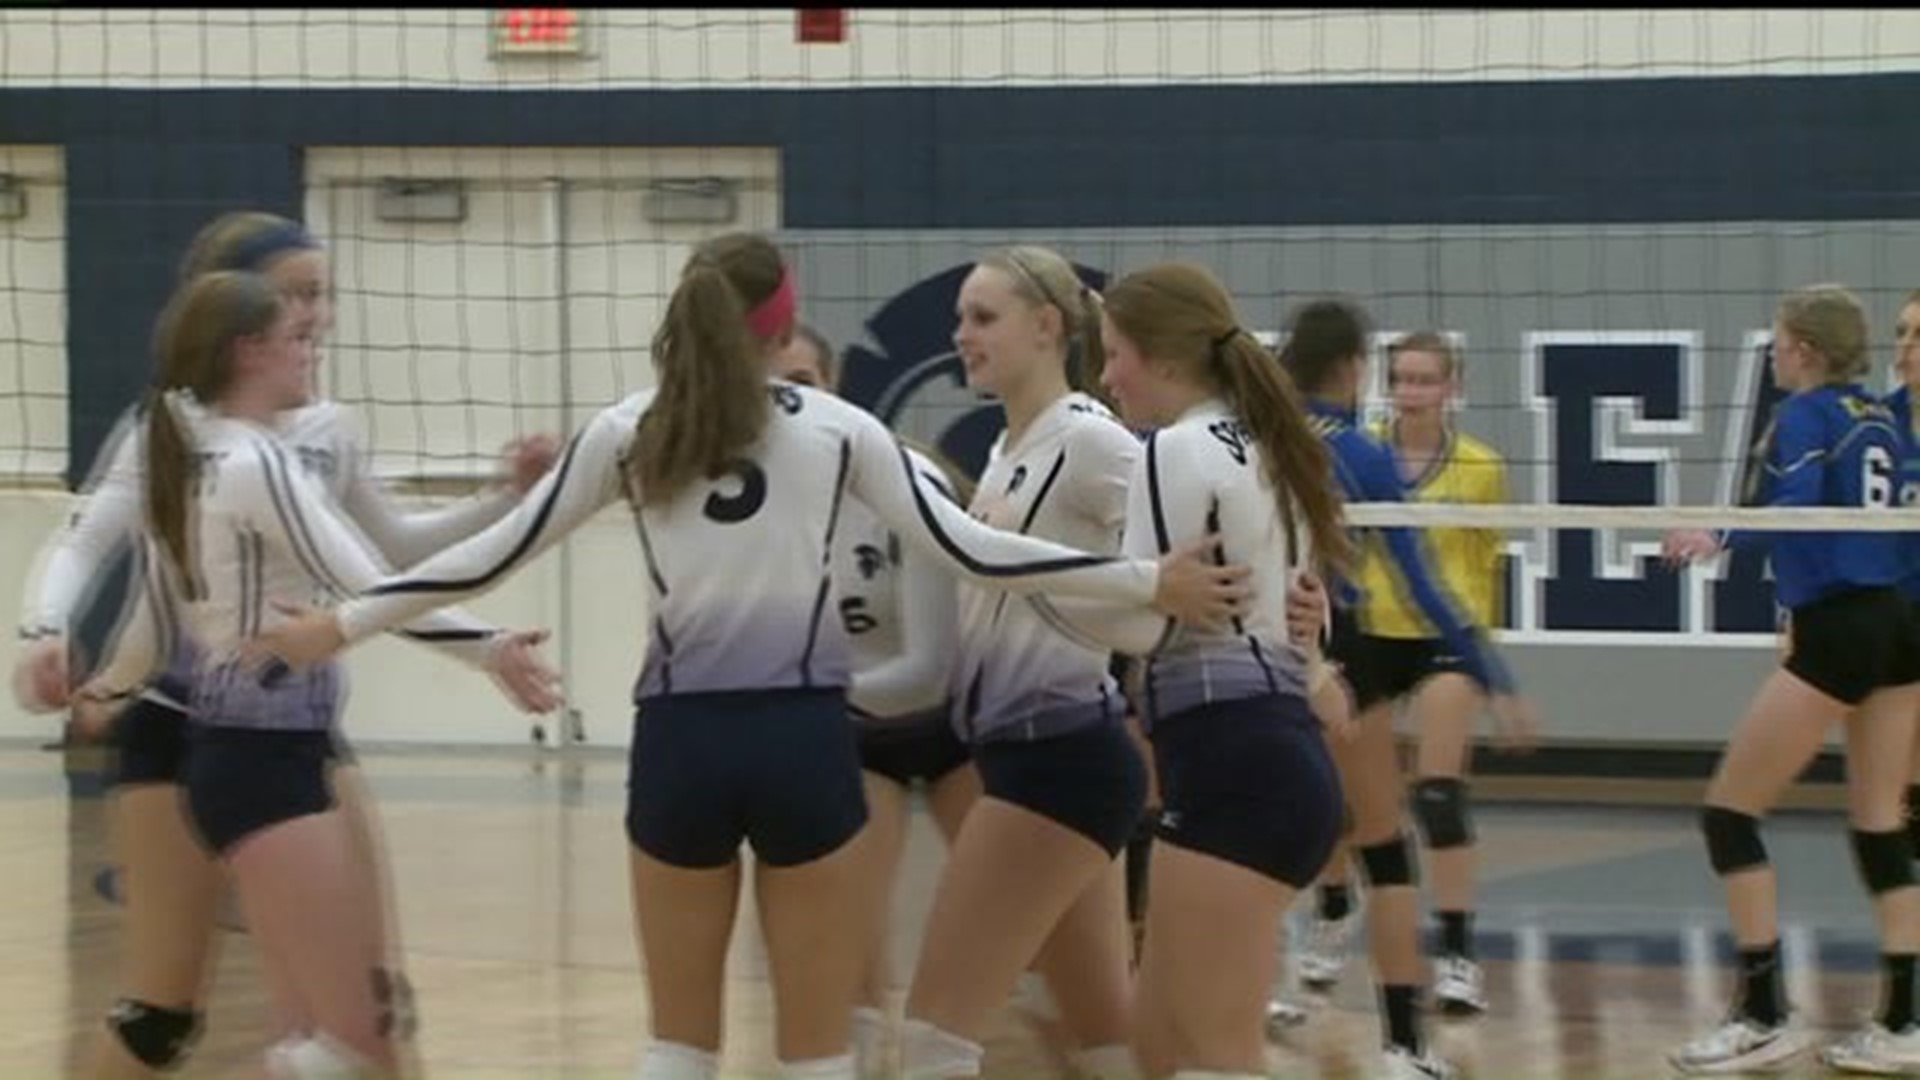 PV Volleyball earns rematch with Bettendorf